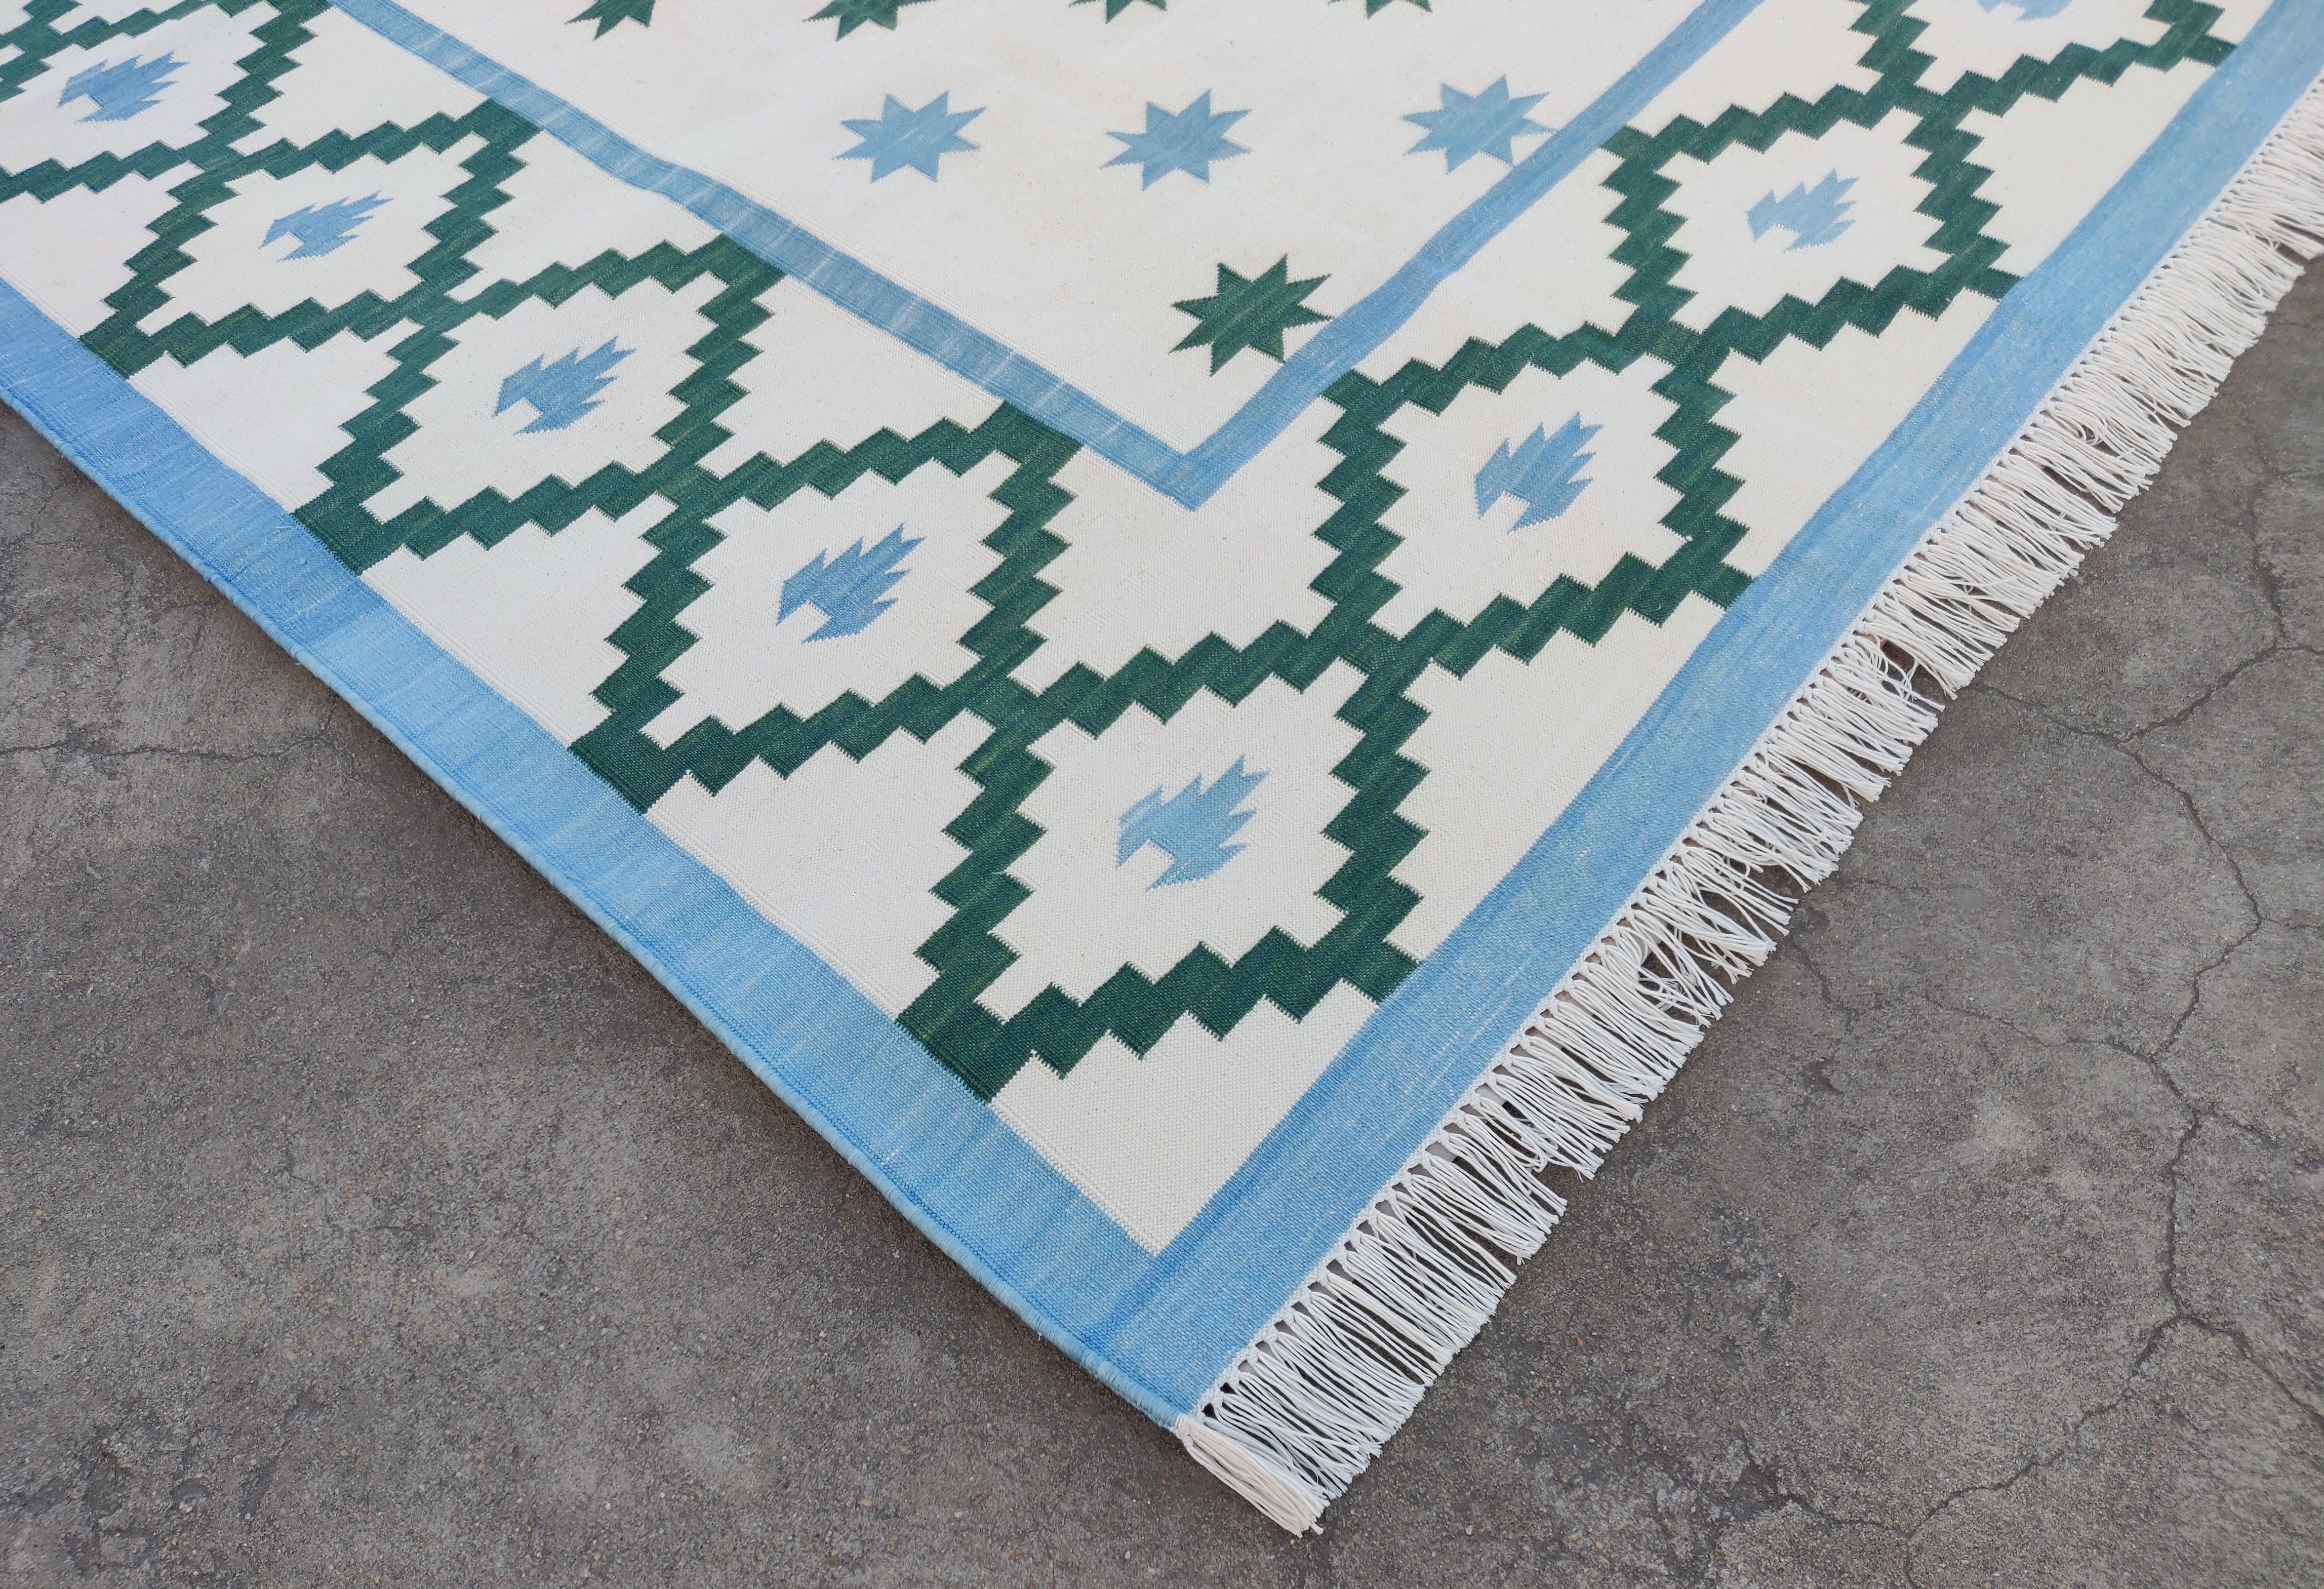 Cotton Natural Vegetable Dyed Cream, Forest Green & Blue Star Patterned Rug-8'x10'
These special flat-weave dhurries are hand-woven with 15 ply 100% cotton yarn. Due to the special manufacturing techniques used to create our rugs, the size and color